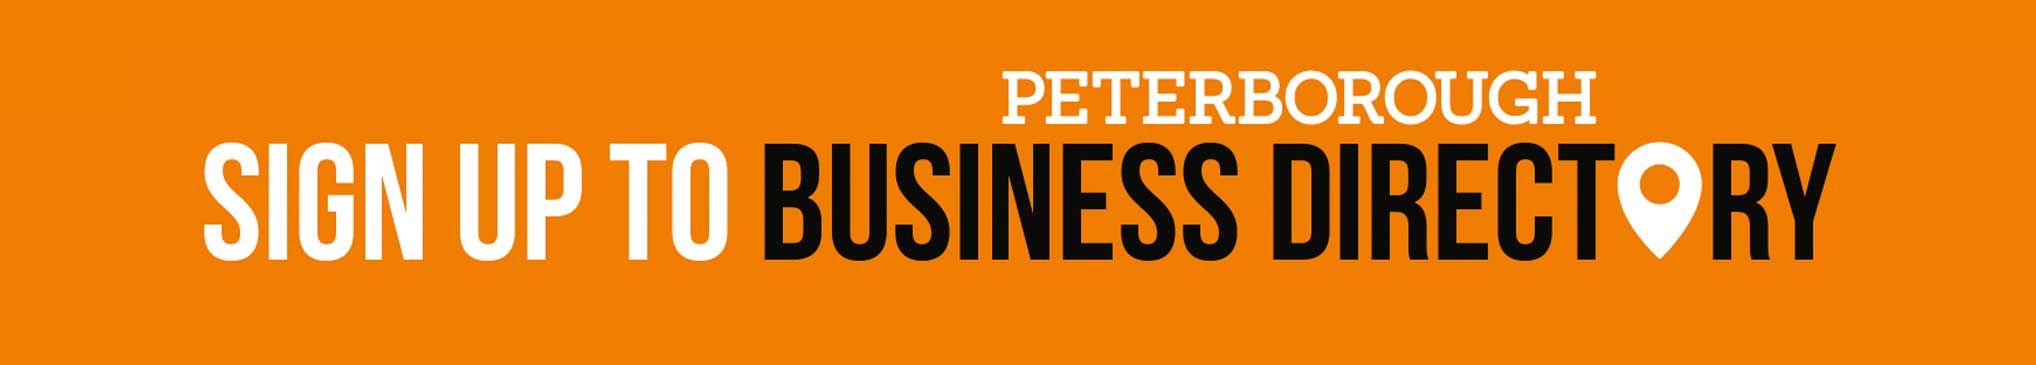 Peterborough Business Directory Signup